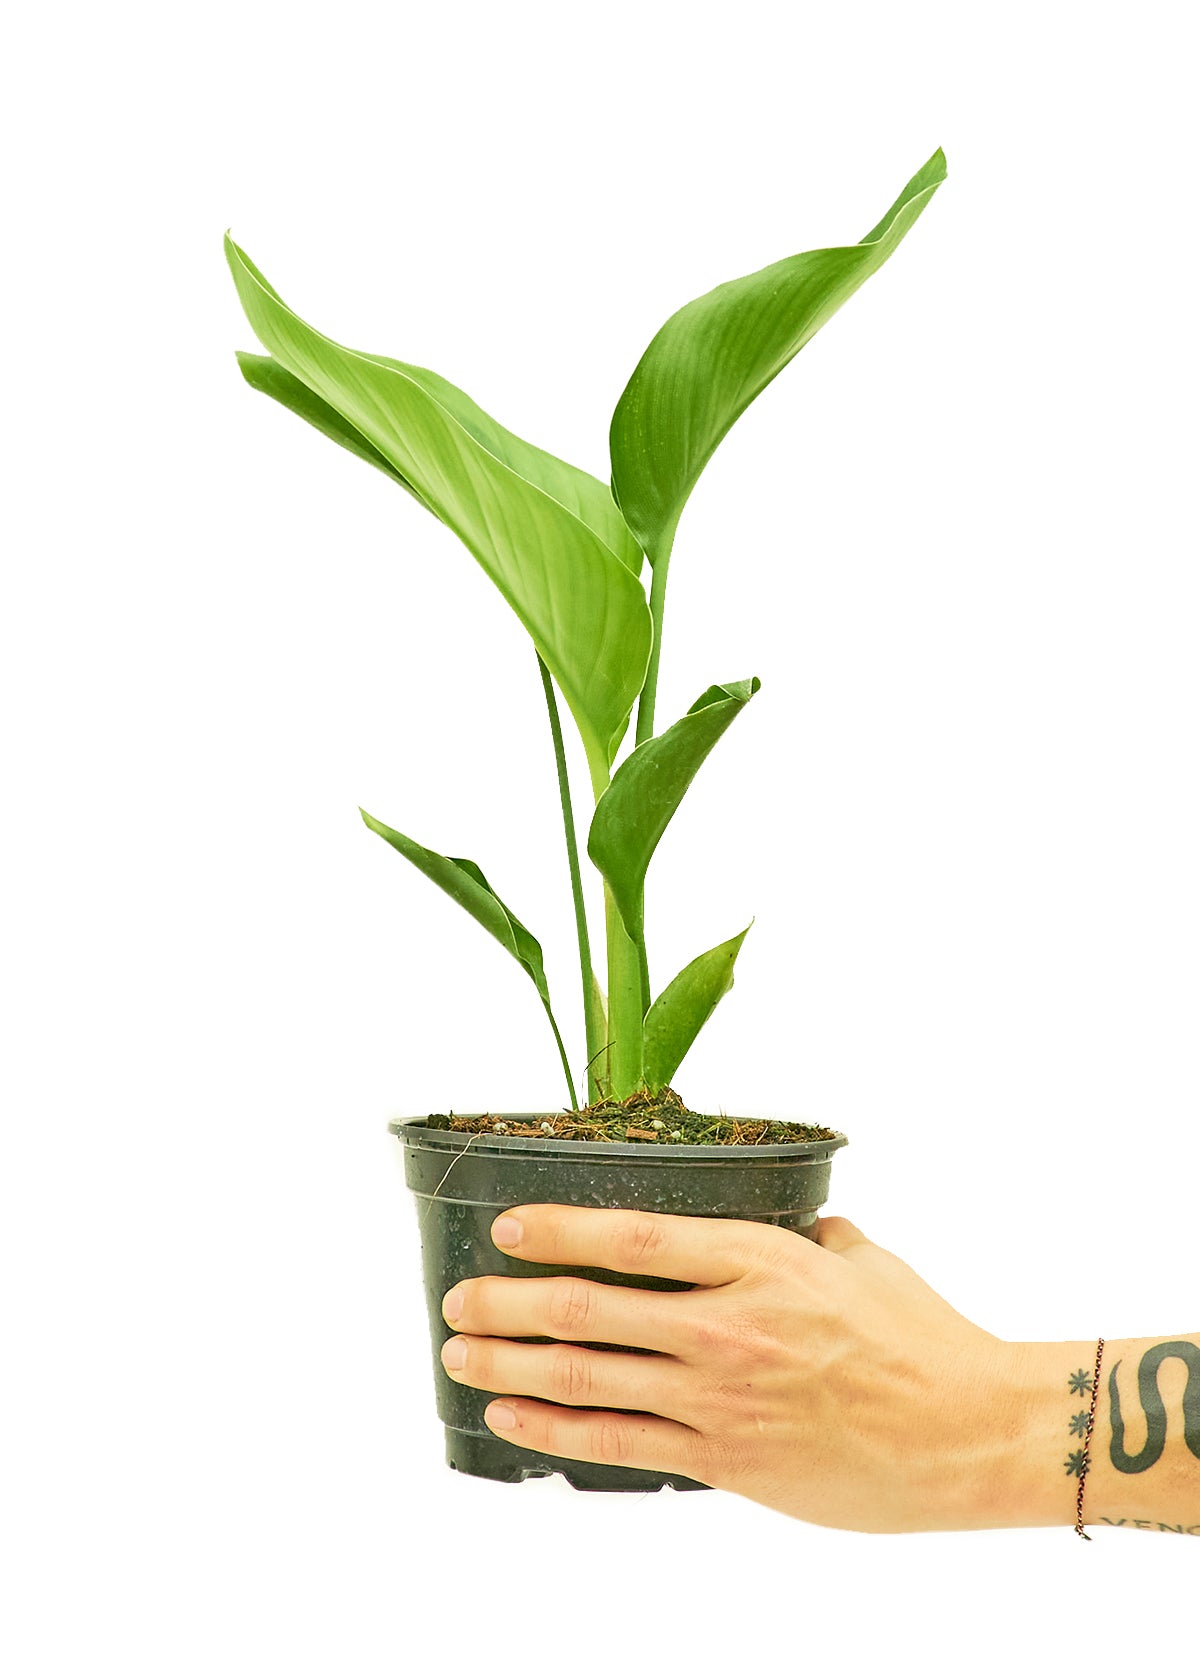 Medium size White Bird of Paradise Plant in a growers pot with a white background with a hand holding the pot